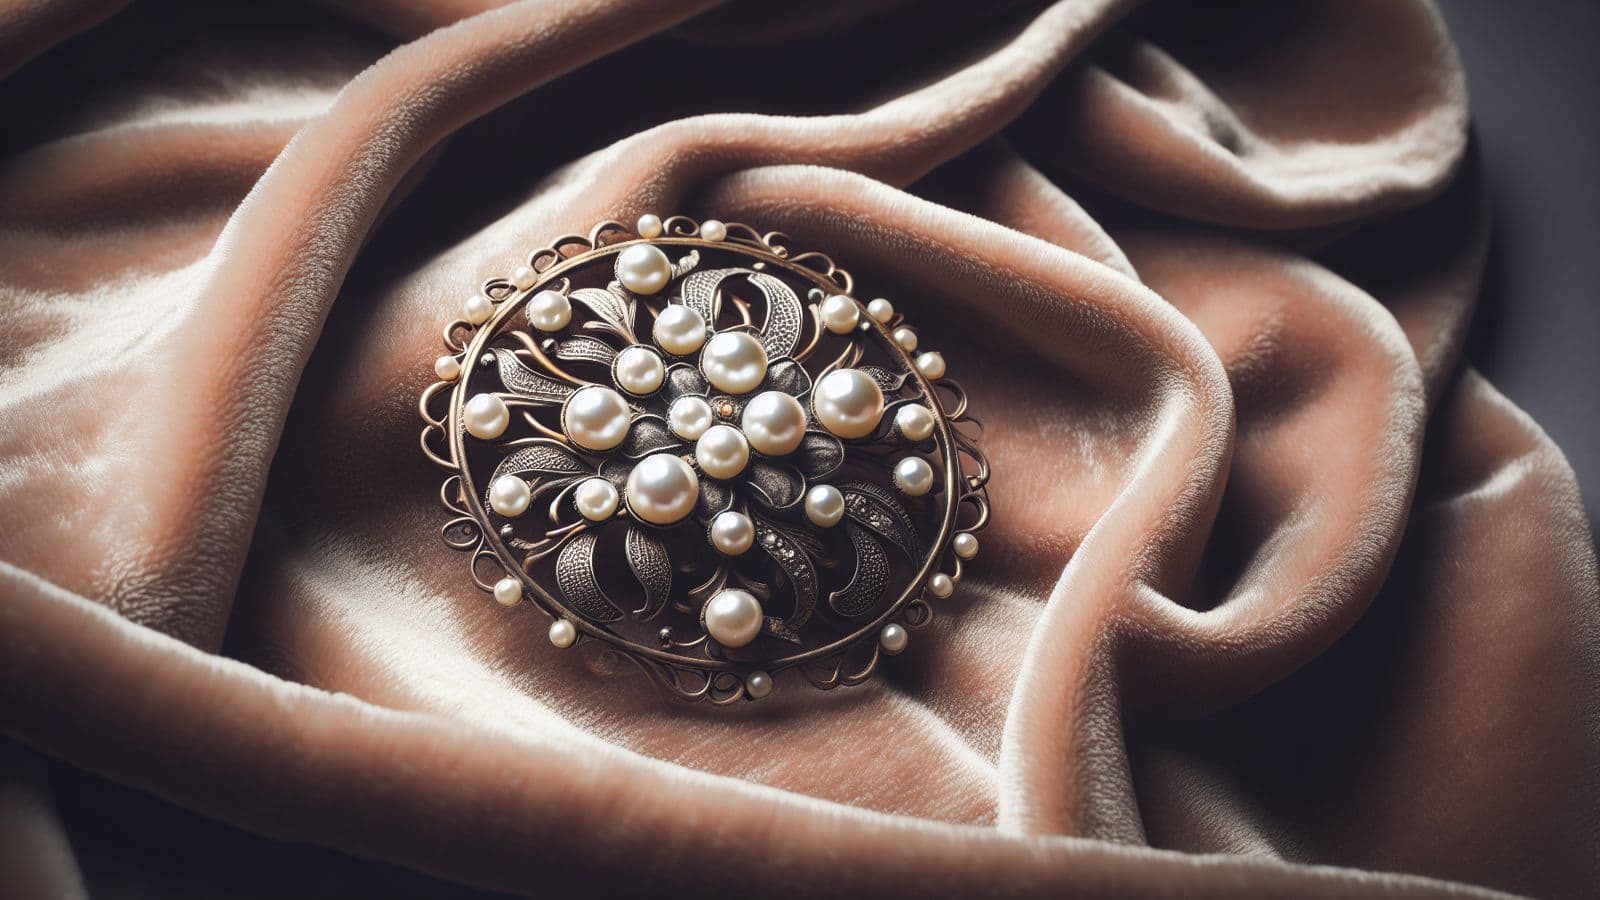 Exploring the timeless elegance of heirloom accessories